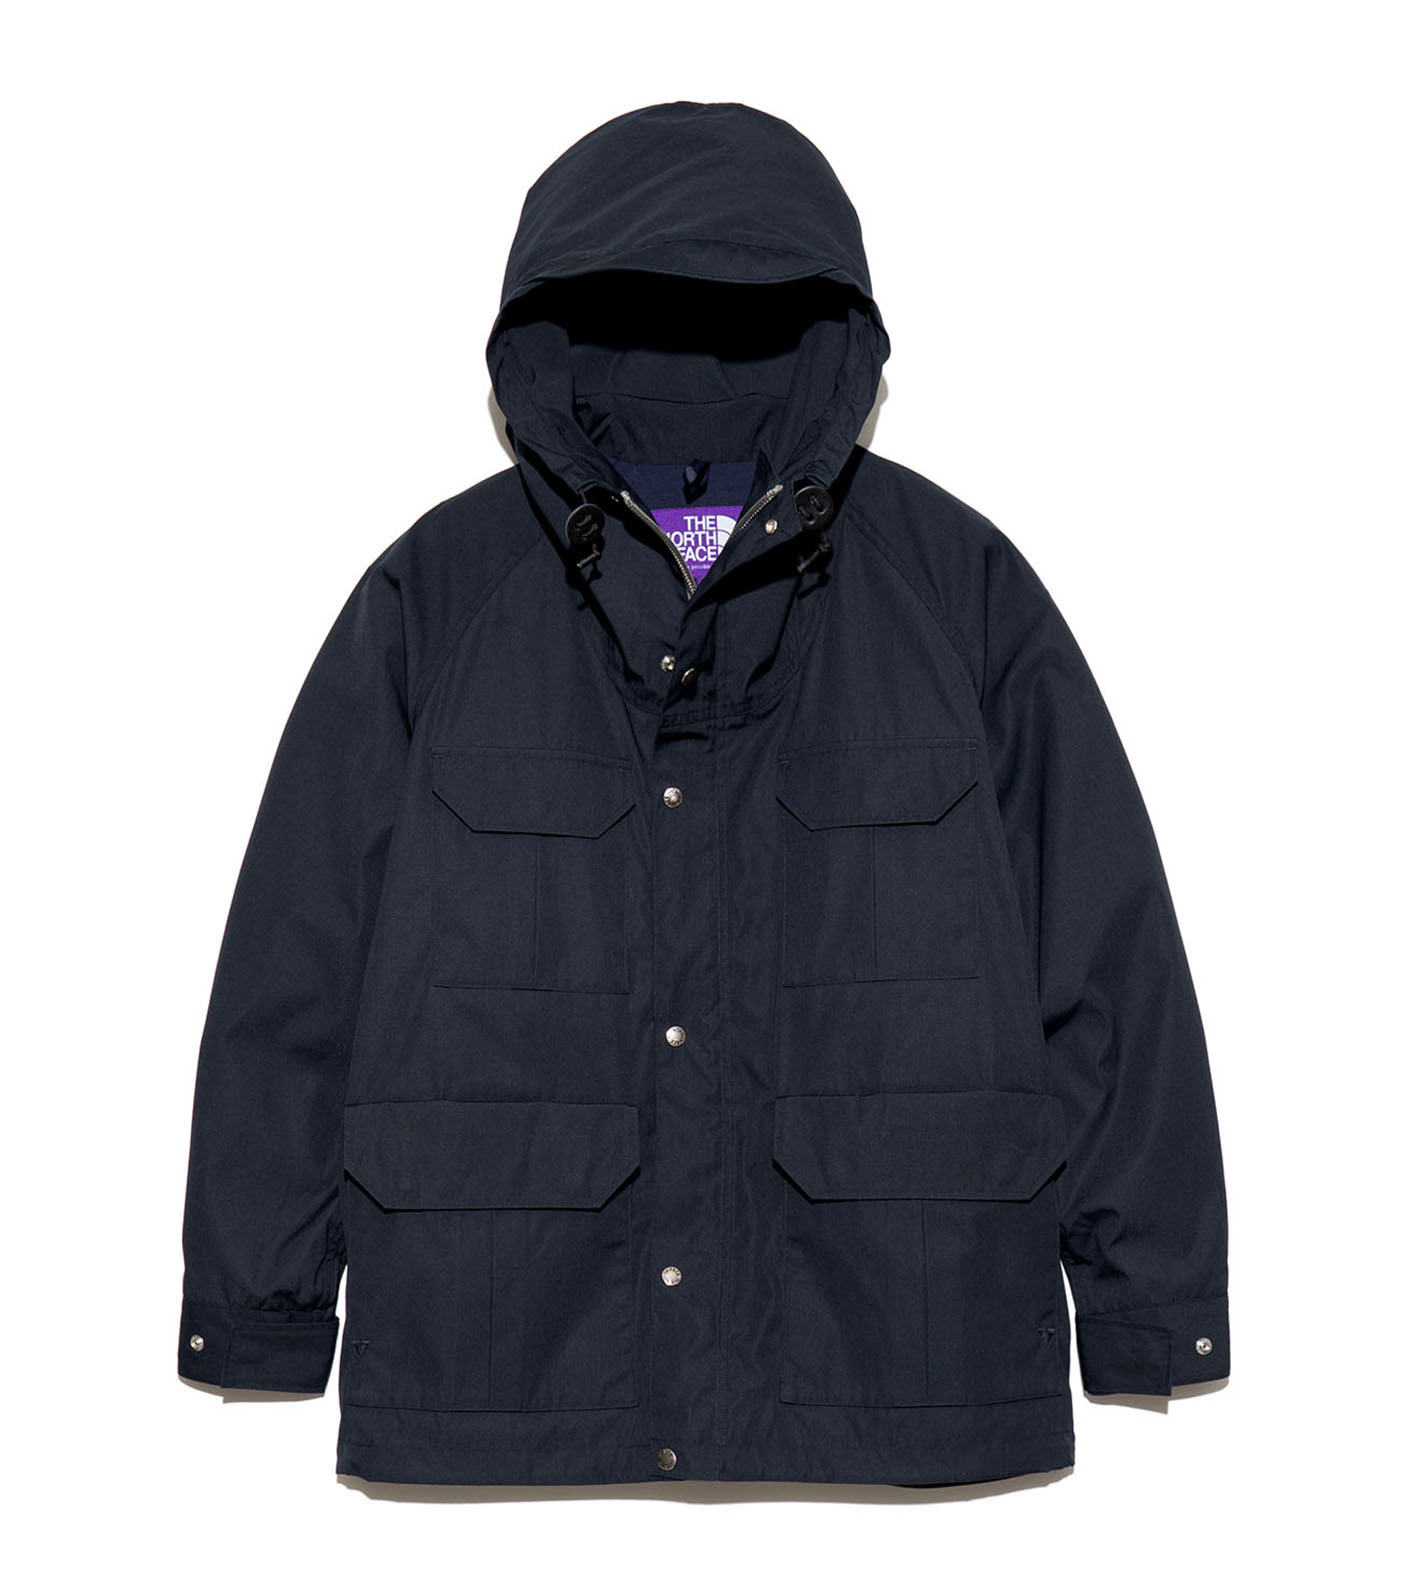 THE NORTH FACE 65/35 GORE-TEX マウンテンコート - www.csihealth.net